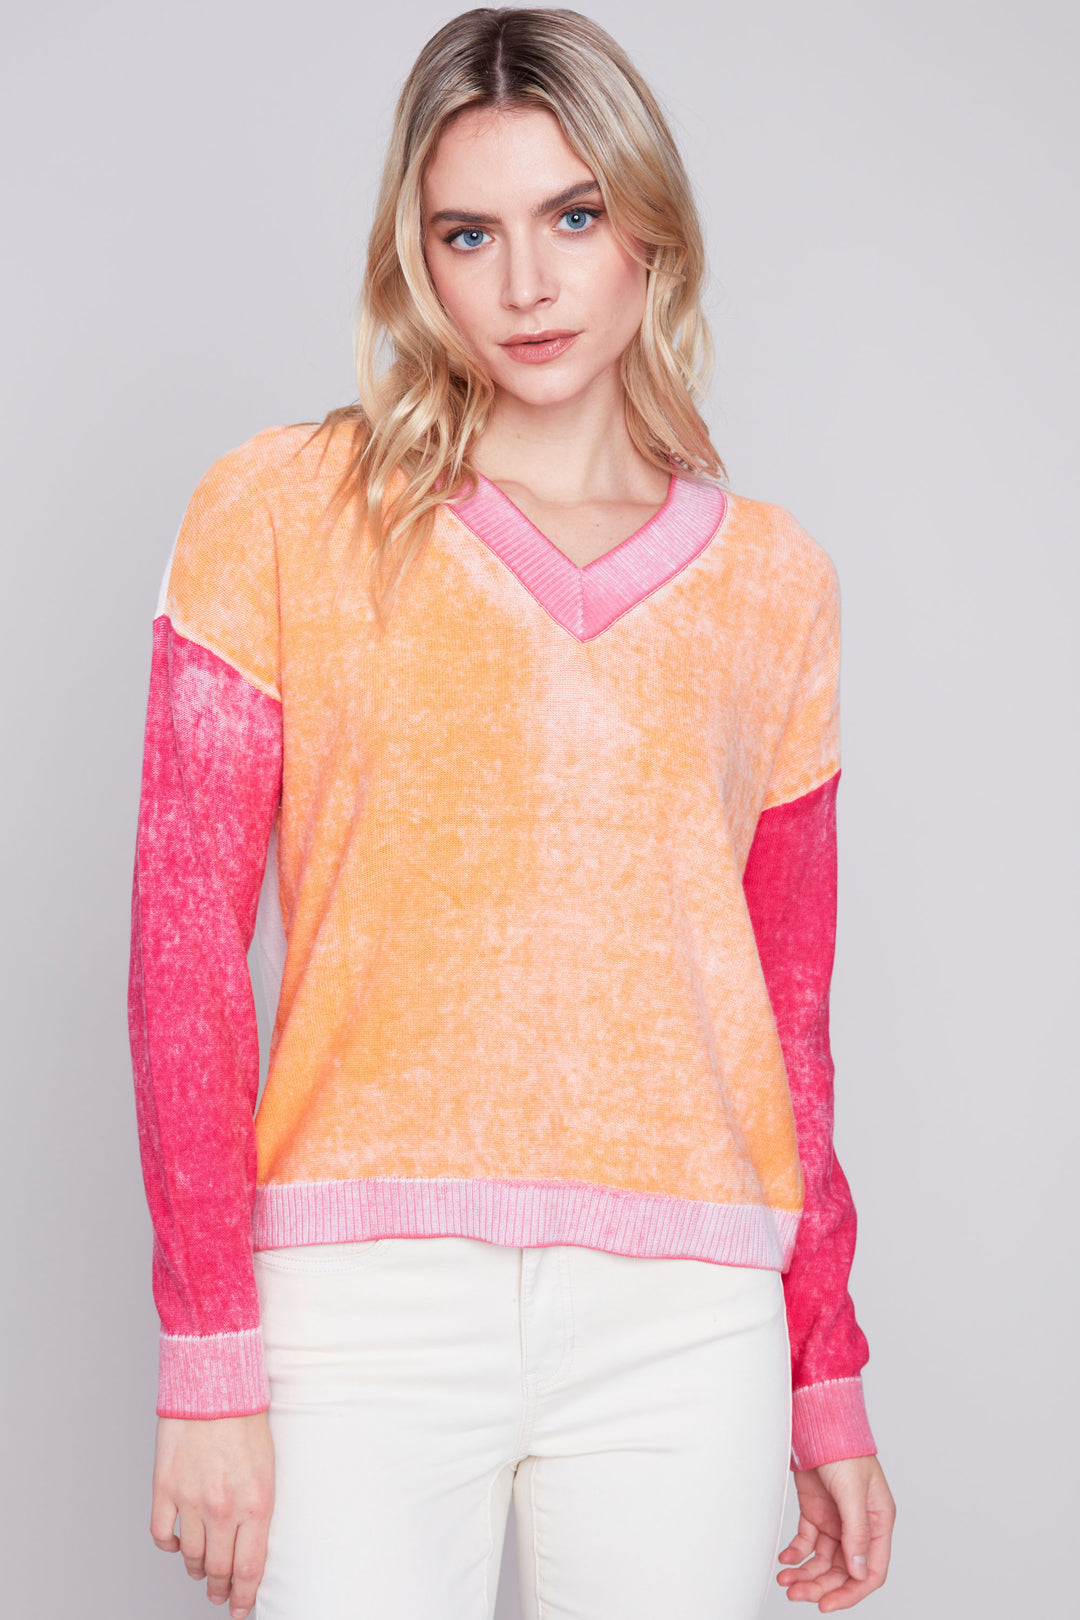 Perfect for summer, this all-cotton light sweater features blocks of fun colour and a smart v-neck style with long sleeves. 